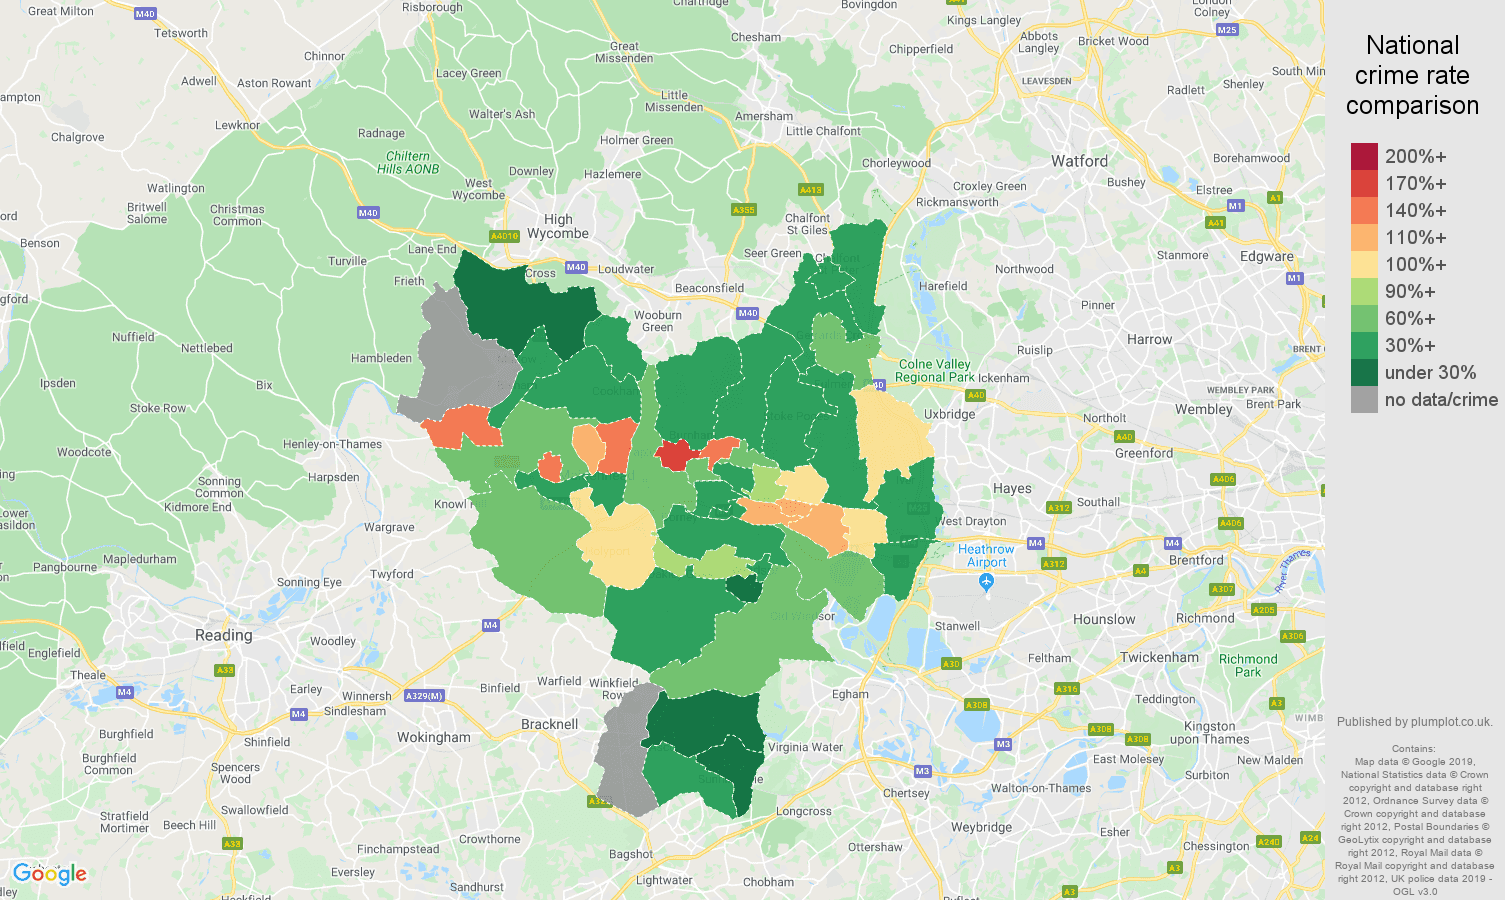 Slough other crime rate comparison map